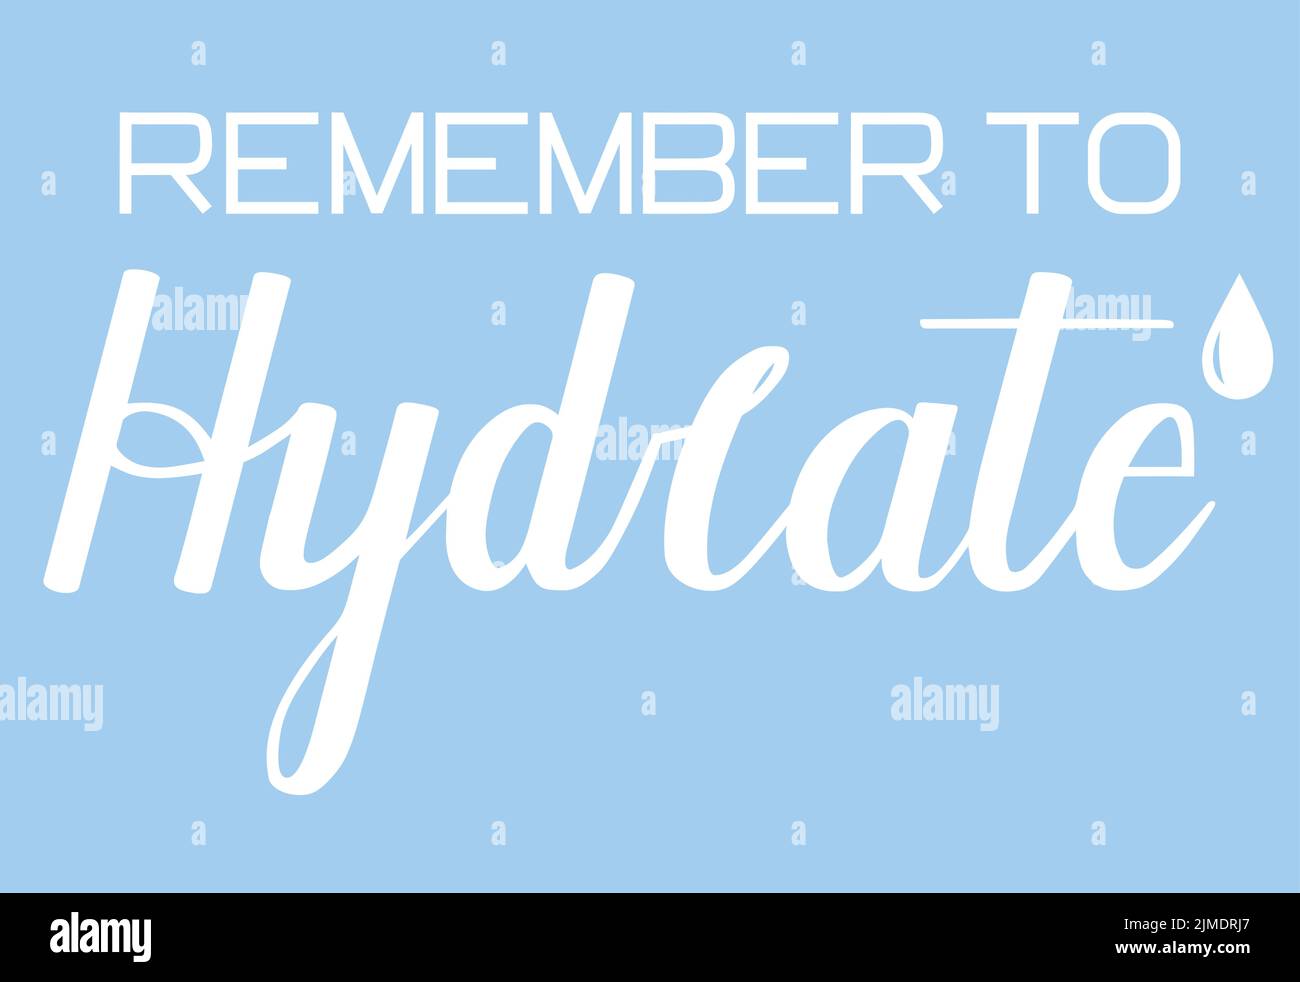 Remember to hydrate modern brush calligraphy that can be used for digital or printable stickers, planners, blogs, posters, banners, or on t-shirts. Stock Vector